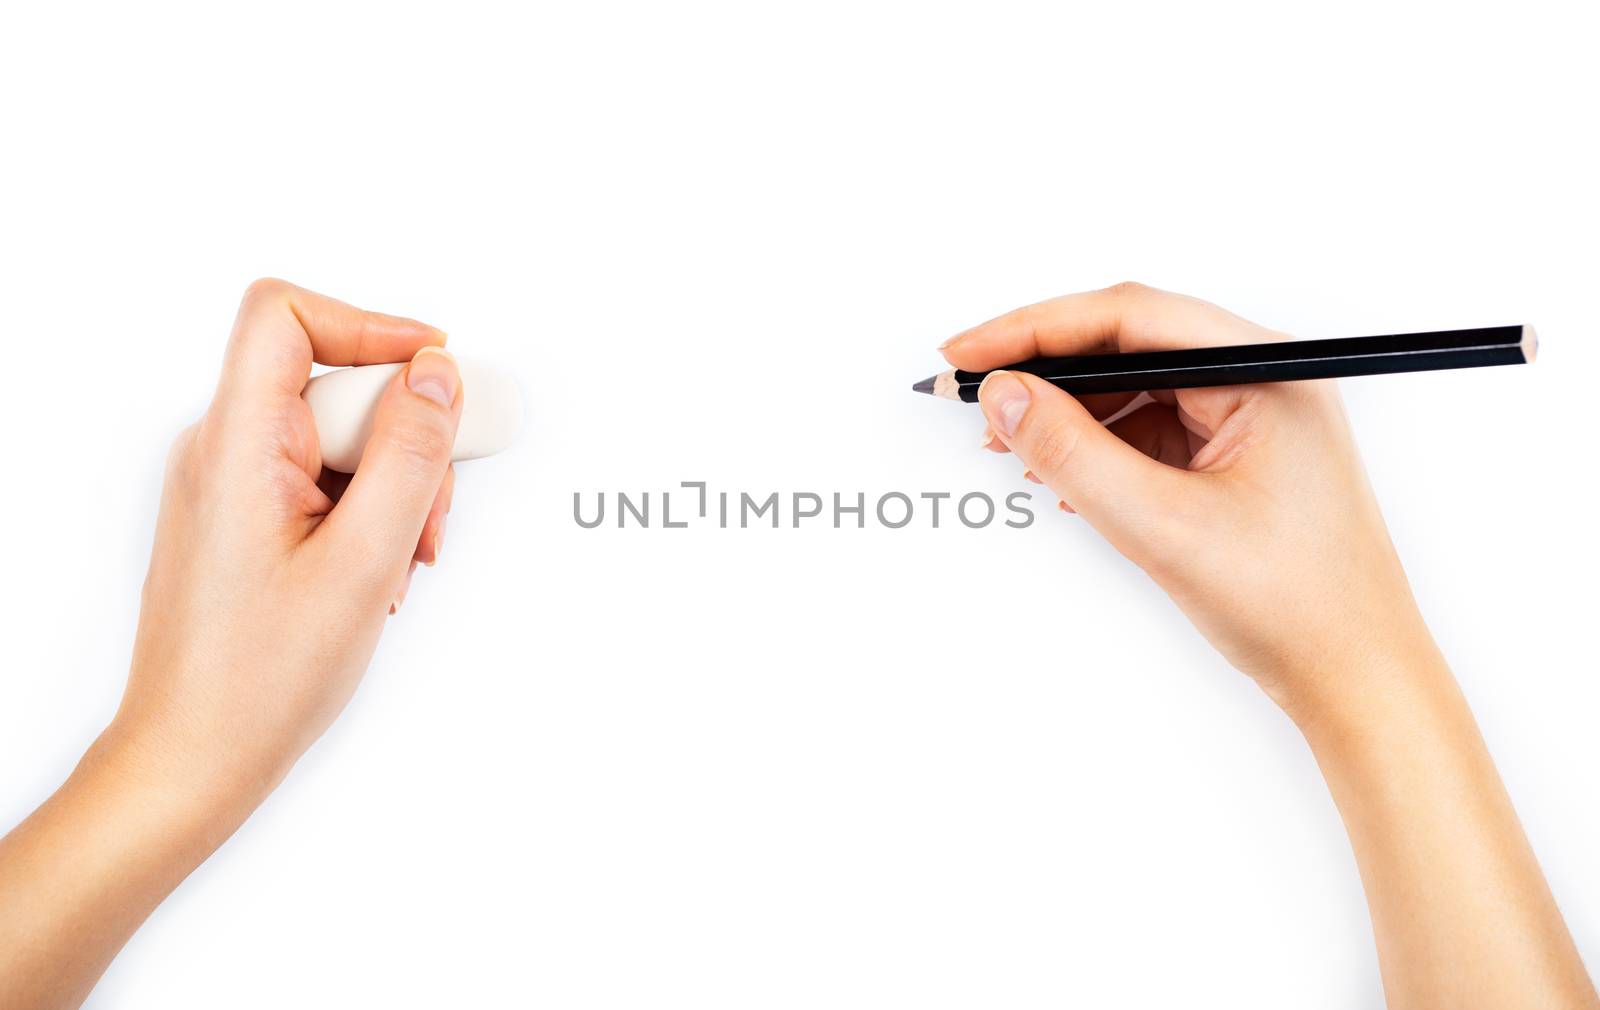 Human hands with pencil and erase rubber writting something. On white background